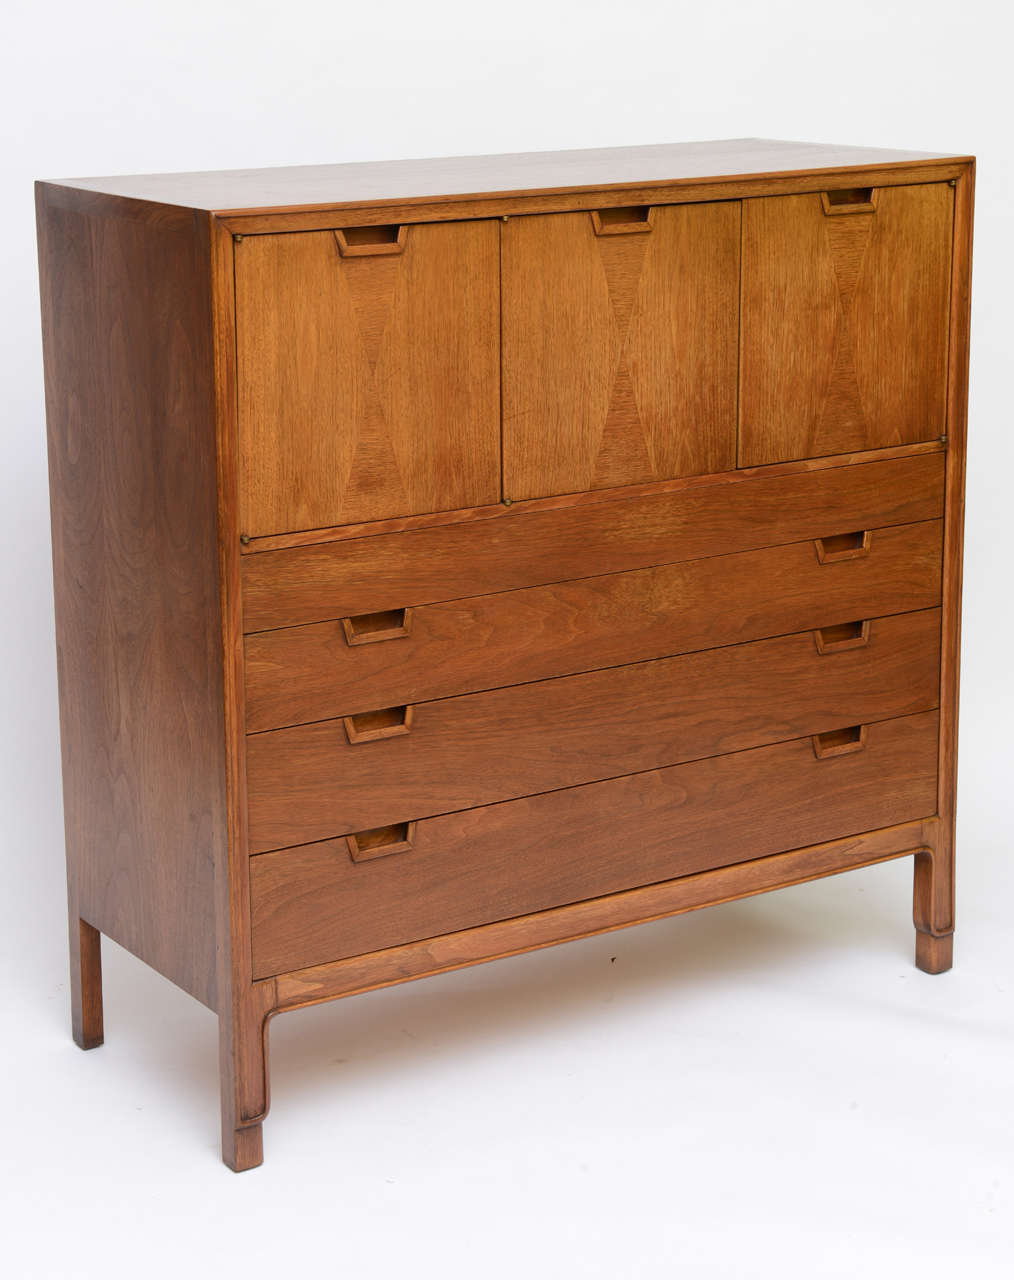 SOLD  John Stuart Janus Collection gentleman's chest of drawers or dresser in beautiful walnut. A modern form providing abundant storage with three top doors opening to shelved compartments above four  drawers. Harlequin inspired inlays on the doors